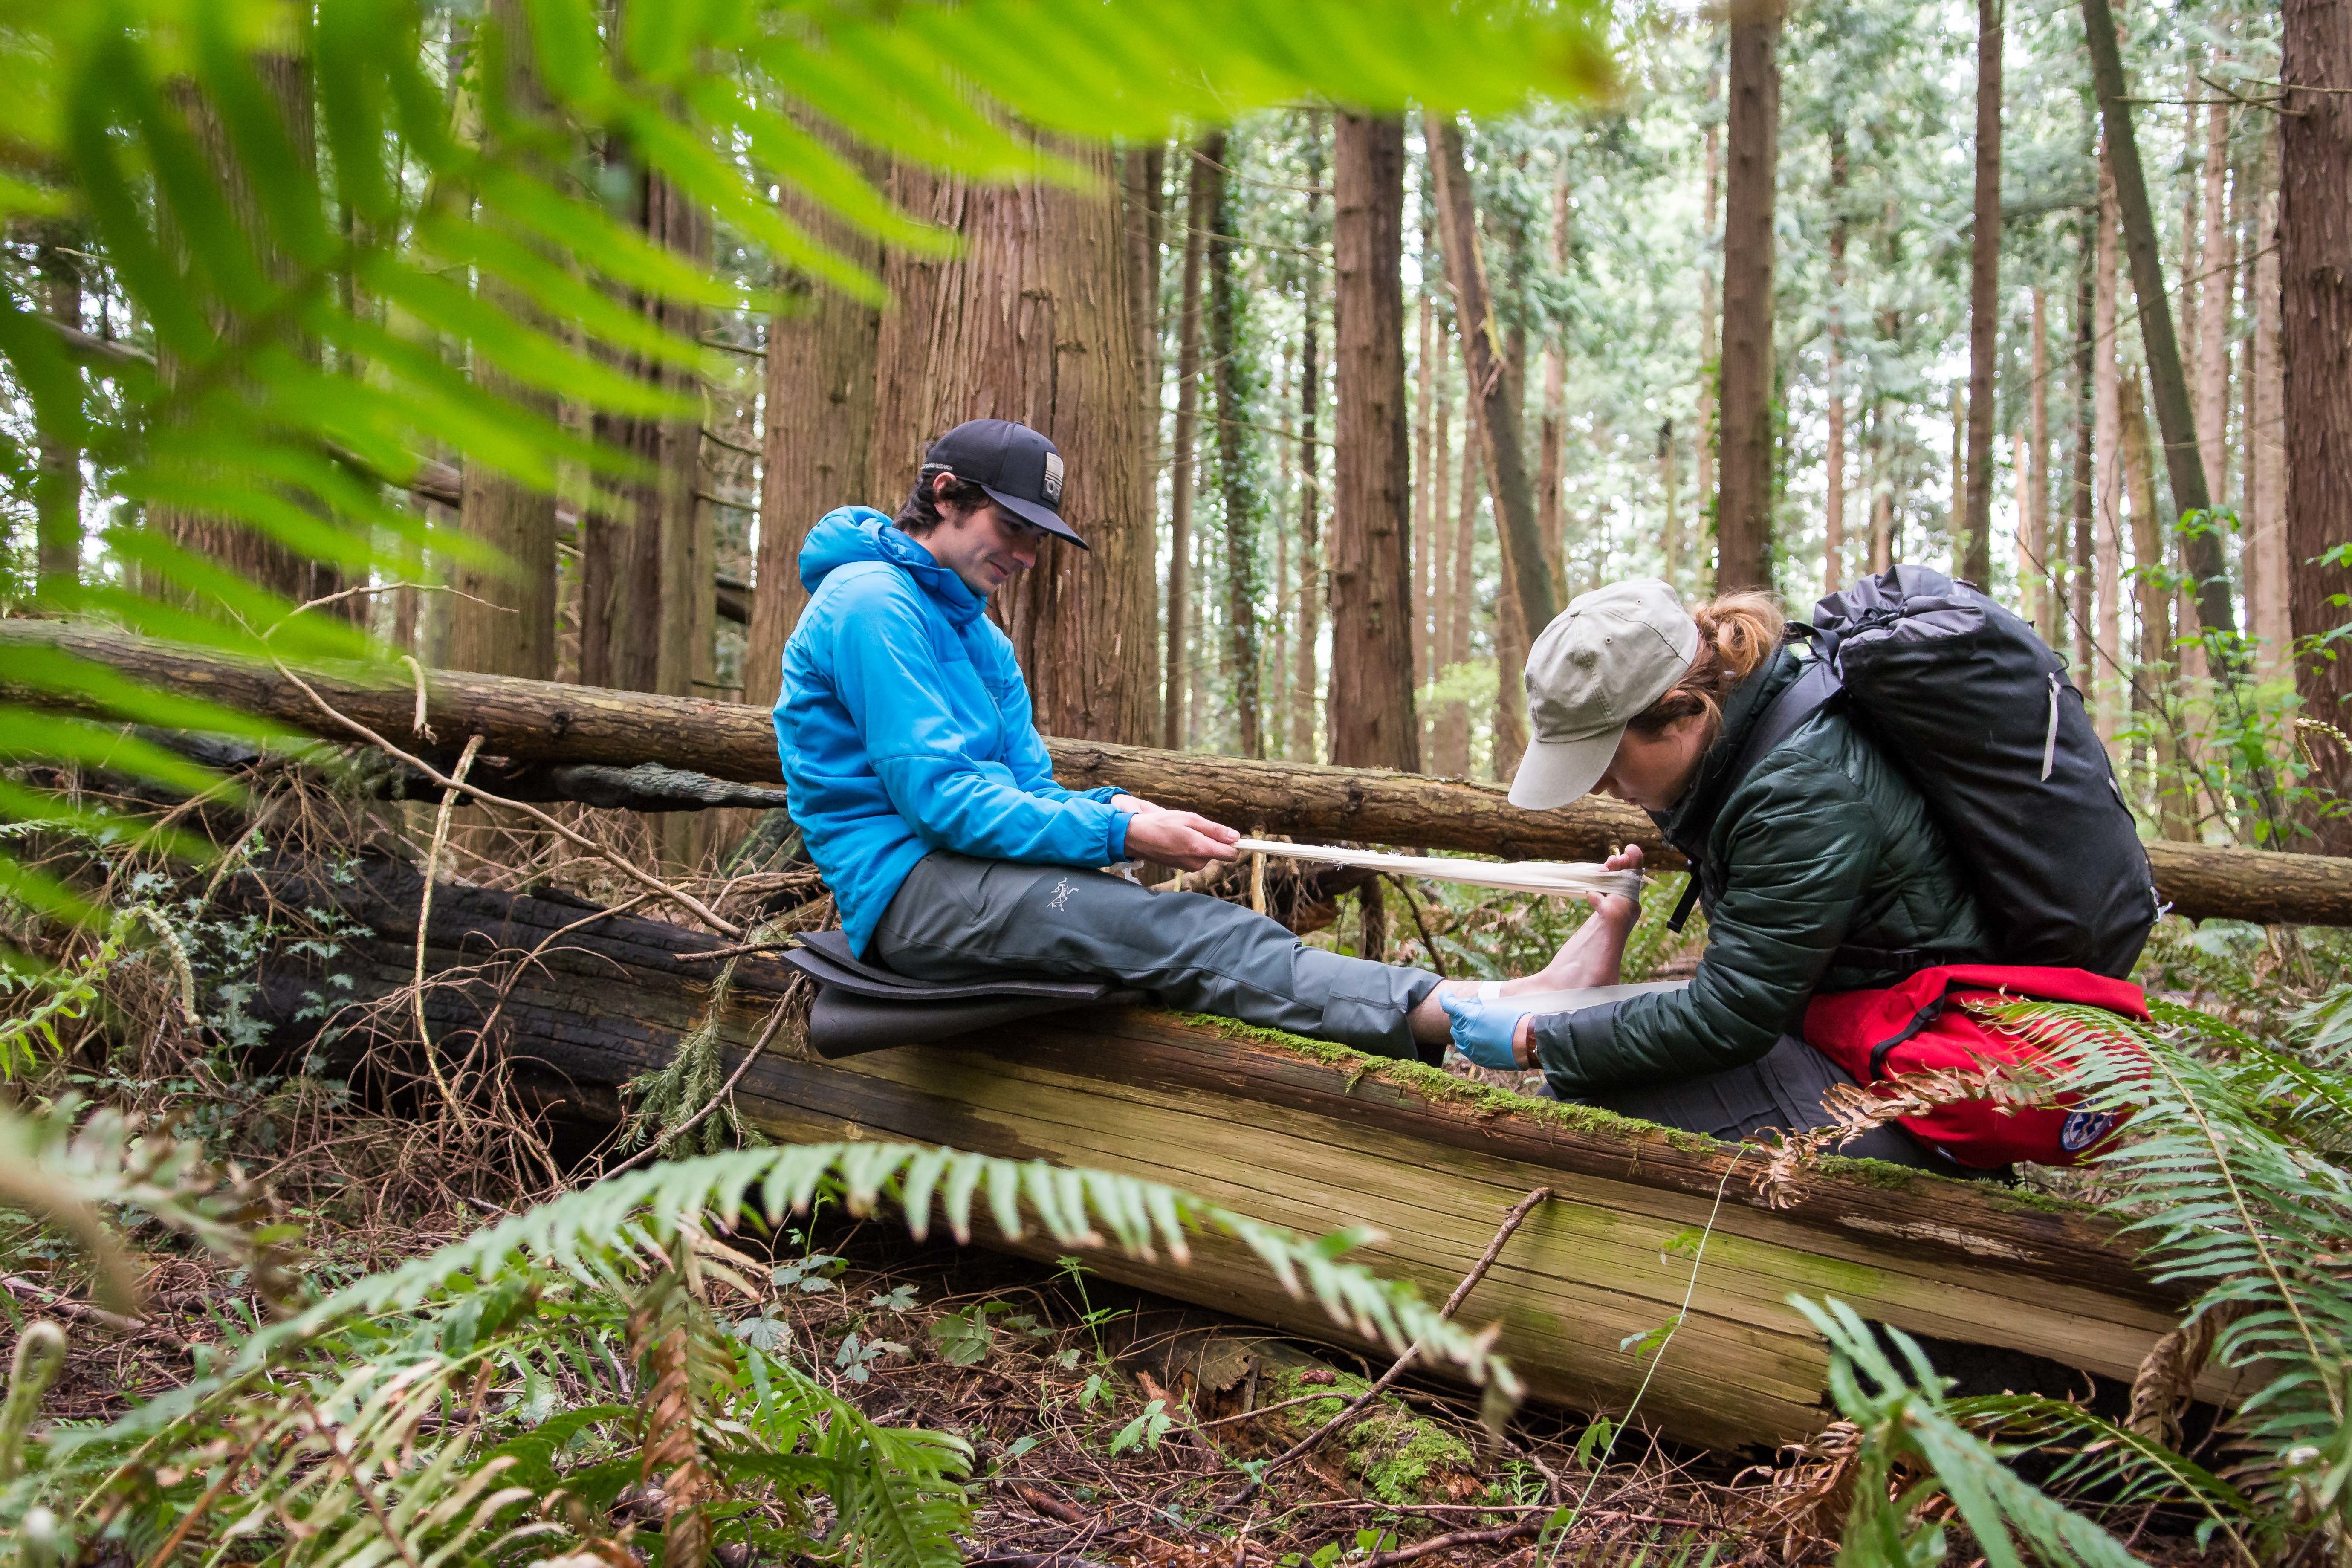 NOLS wilderness medicine student practices caring for patient in the outdoors